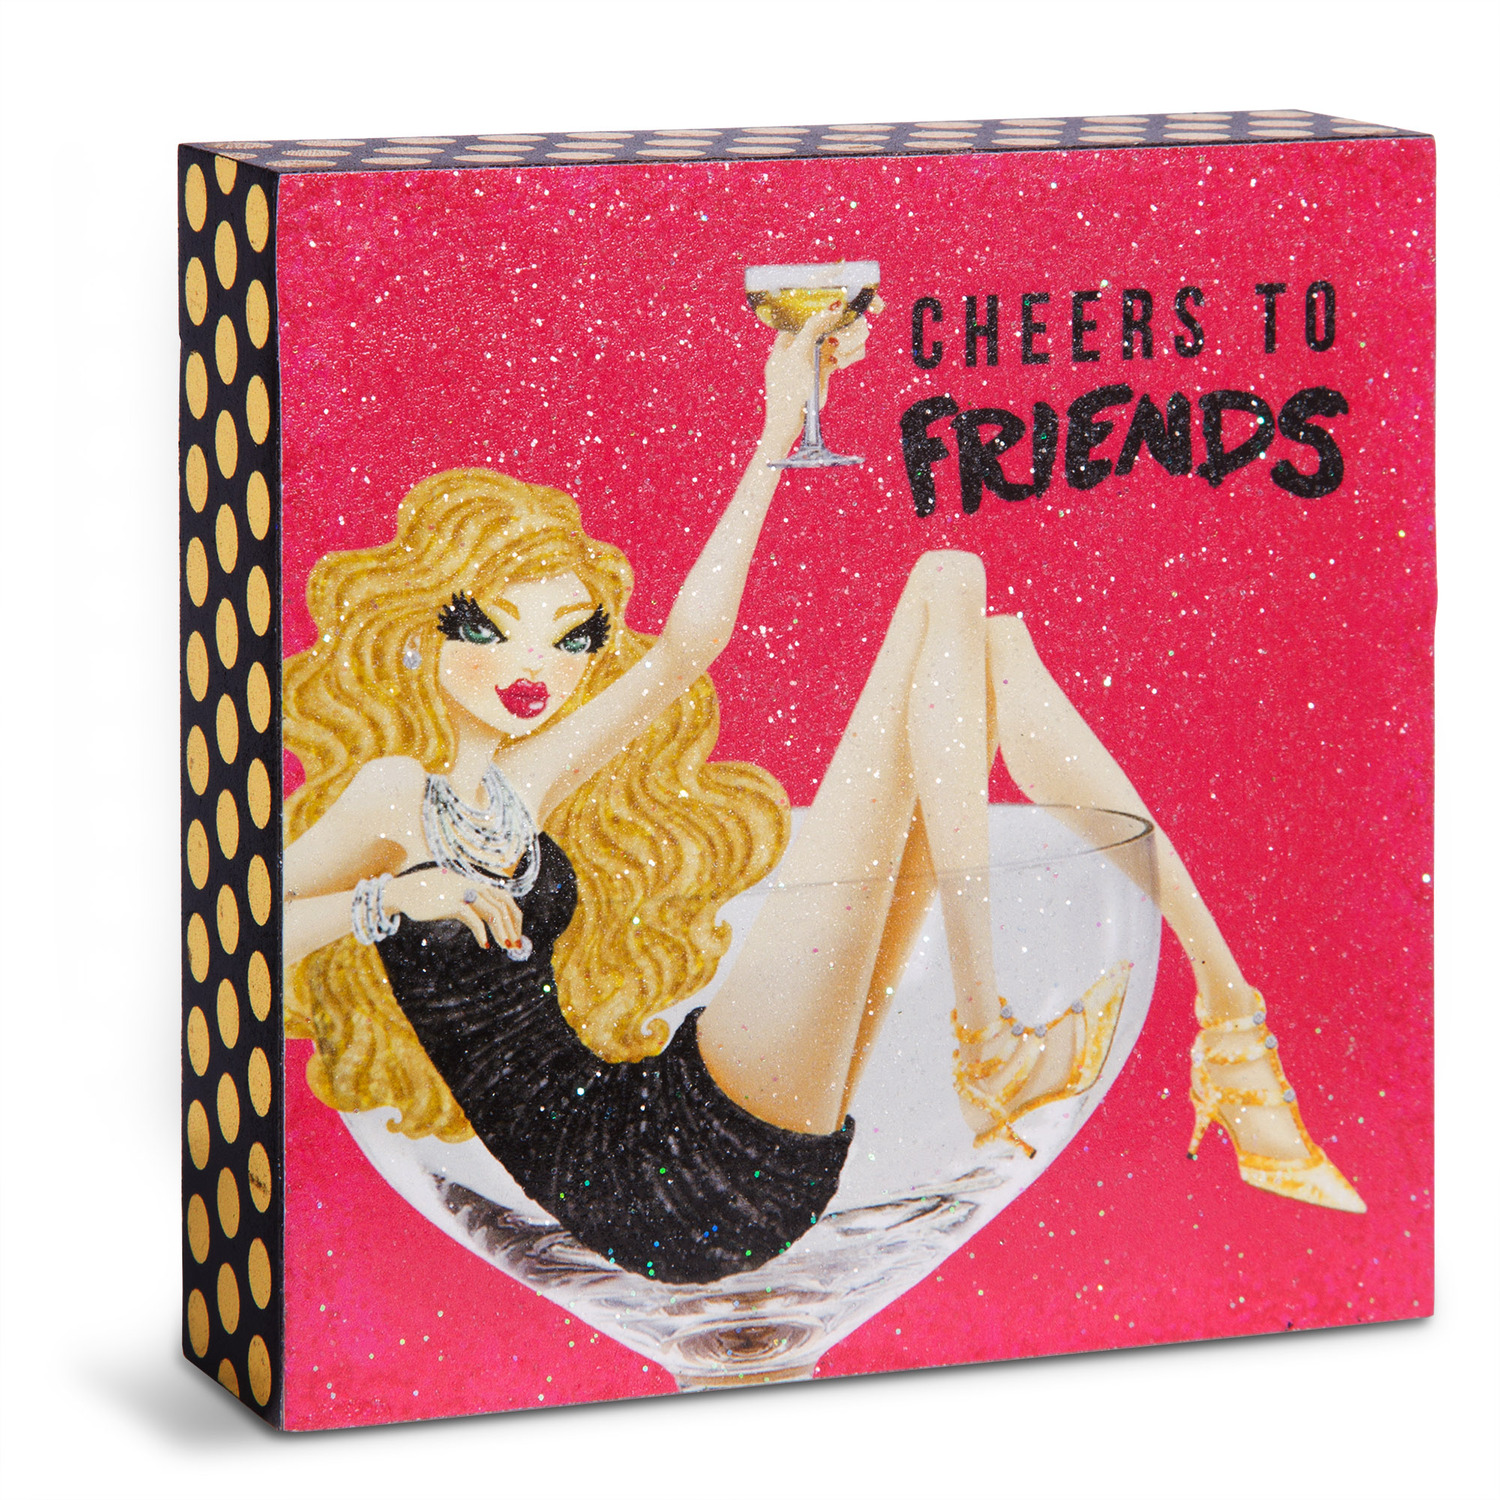 Cheers to Friends by Girlfinds - Cheers to Friends - 4" x 4" Plaque